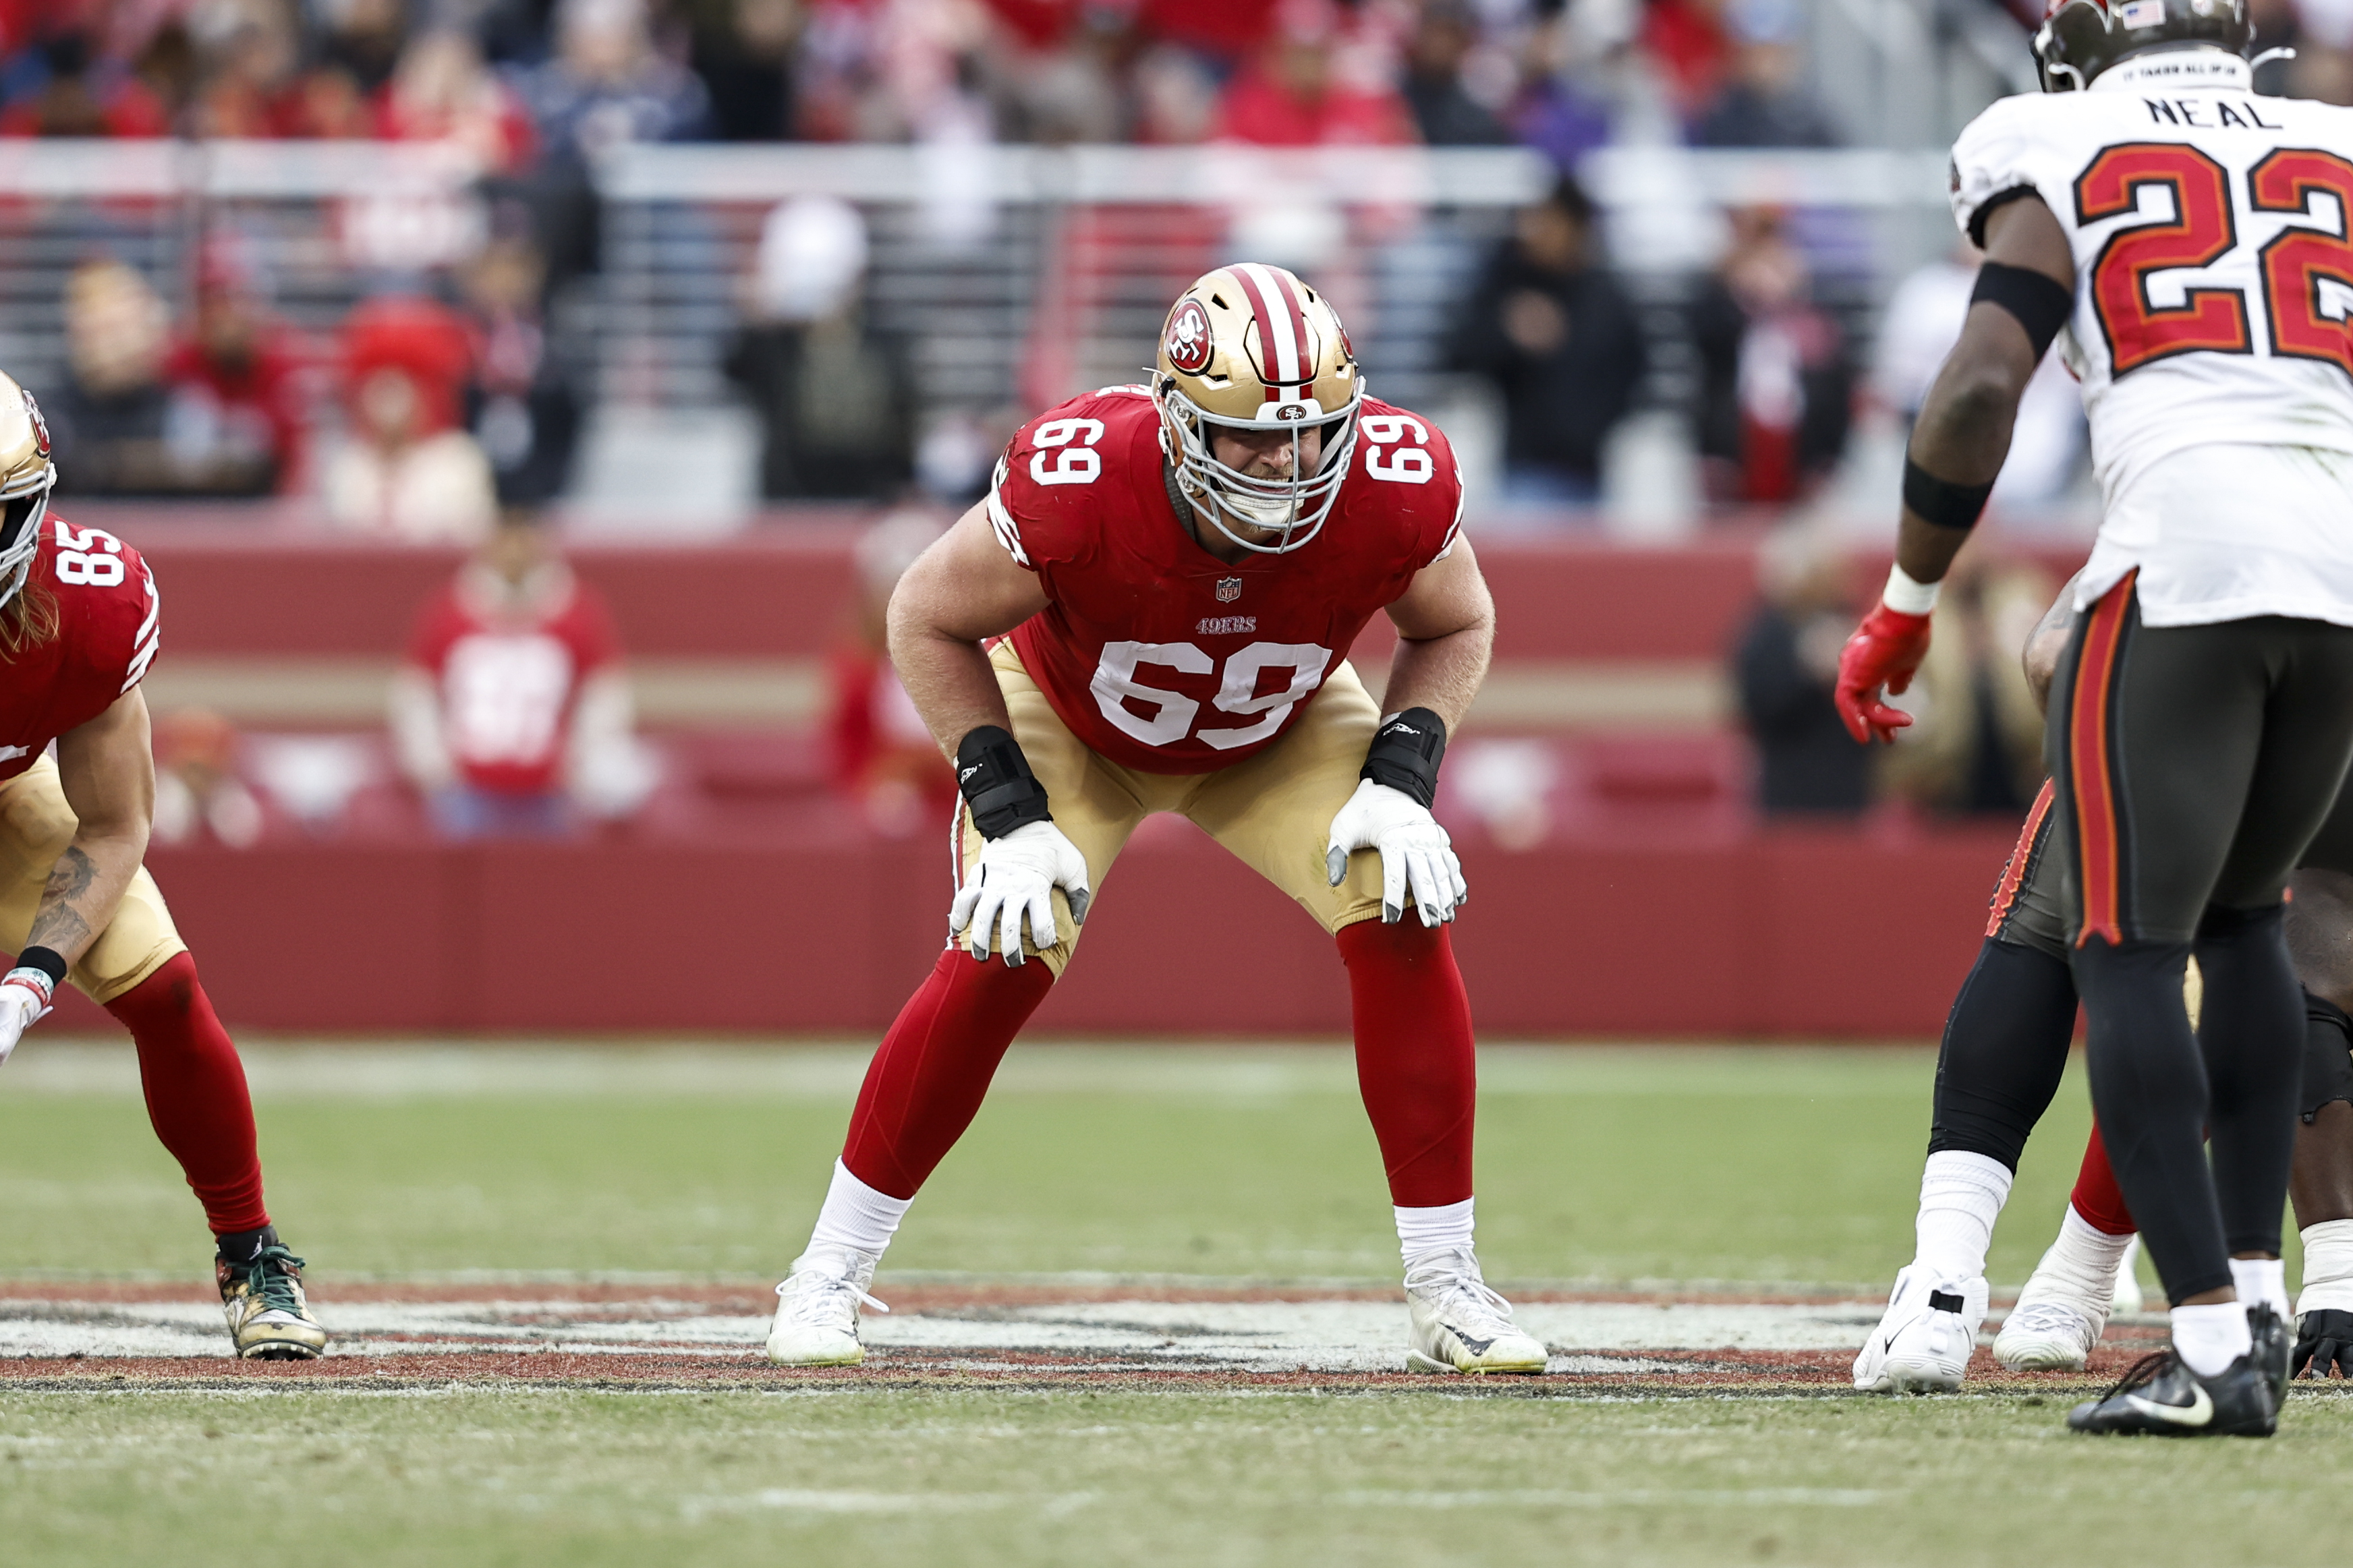 Offensive tackle Mike McGlinchey (#69) of the San Francisco 49ers lines up in the game against the Tampa Bay Buccaneers at Levi's Stadium in Santa Clara, California, December 11, 2022. /CFP 